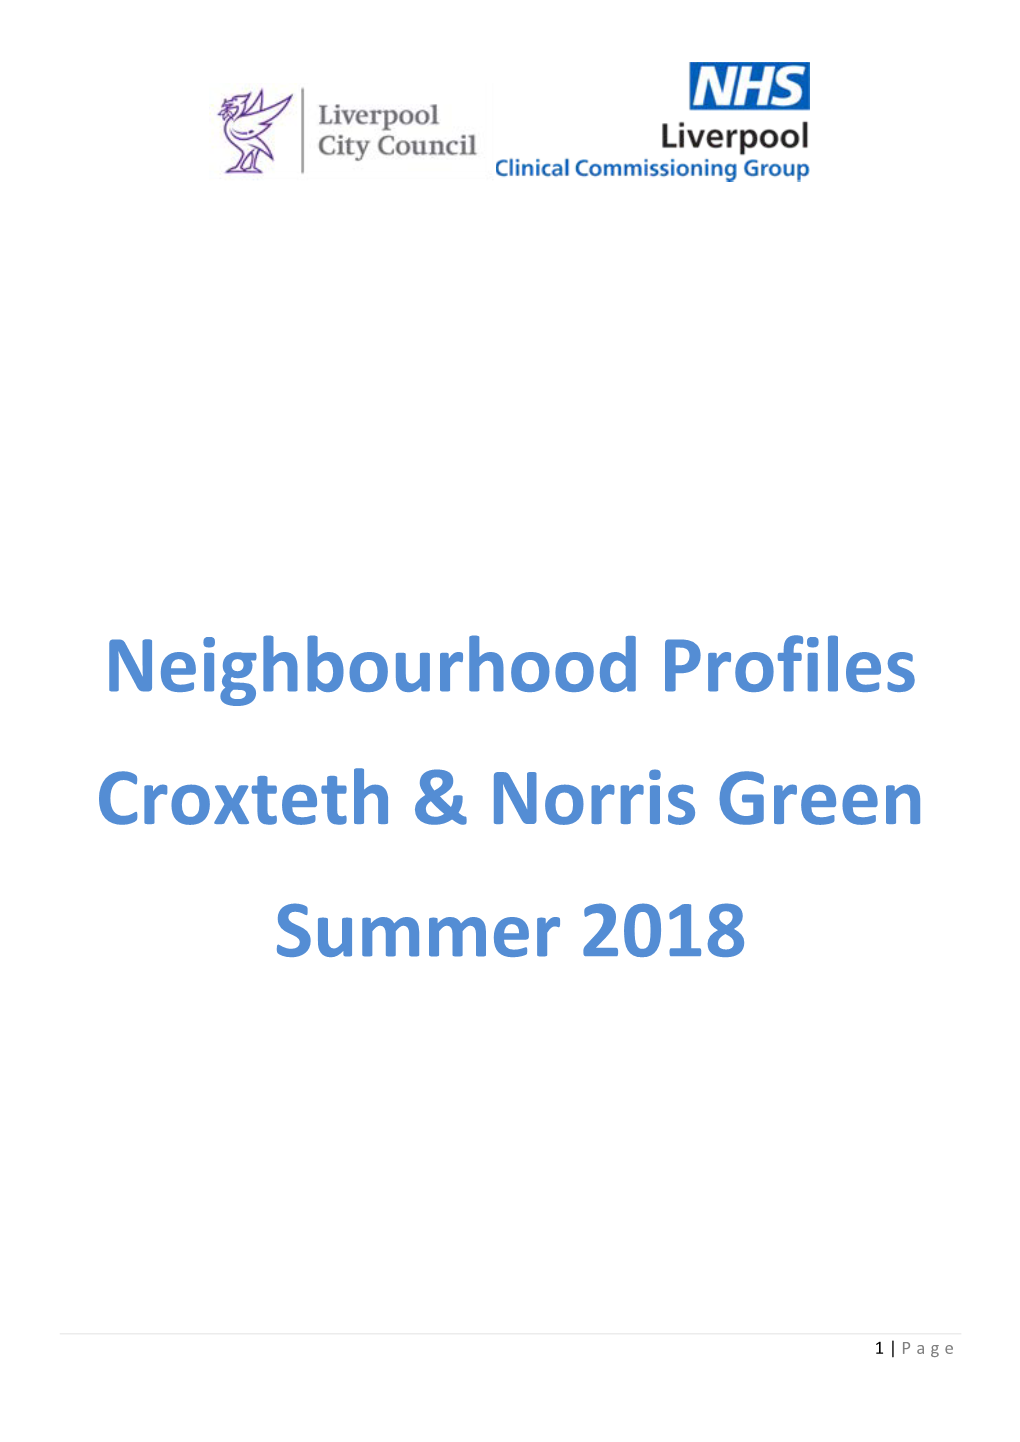 Croxteth and Norris Green